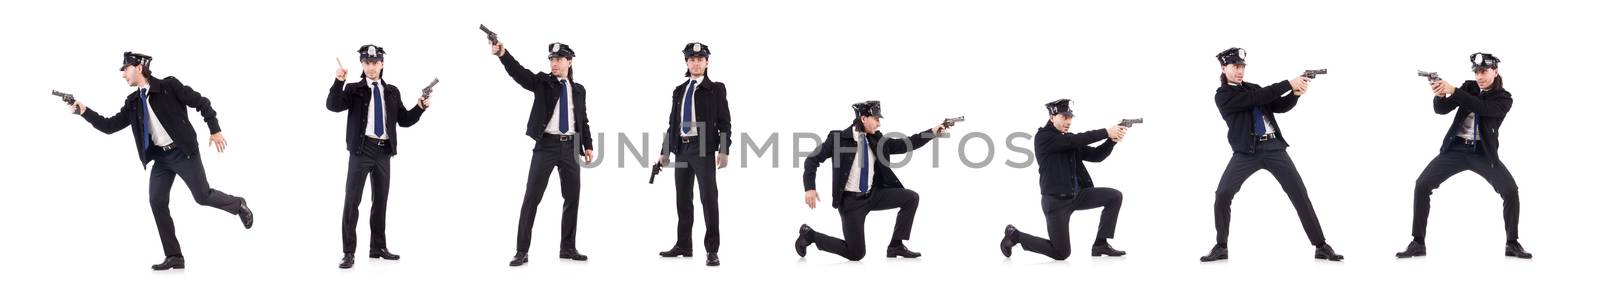 Police officer isolated on white